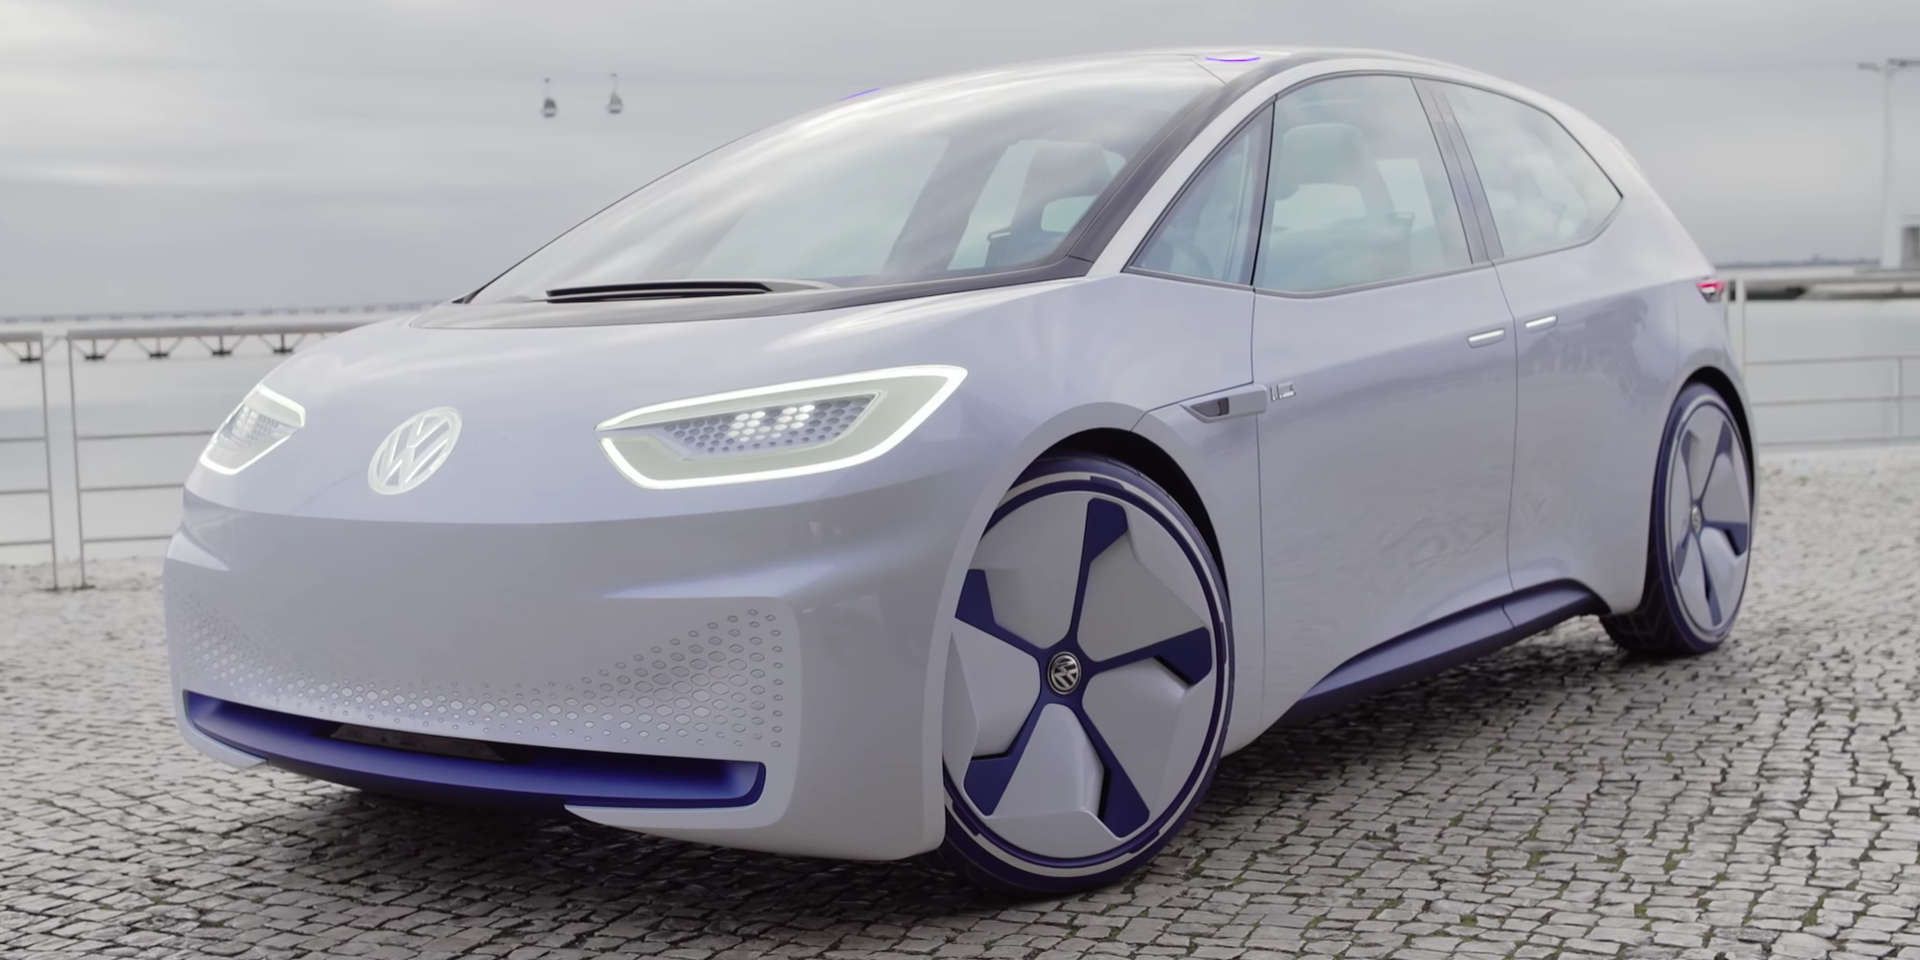 Volkswagen: VW vehicles to converse with drivers via ChatGPT by